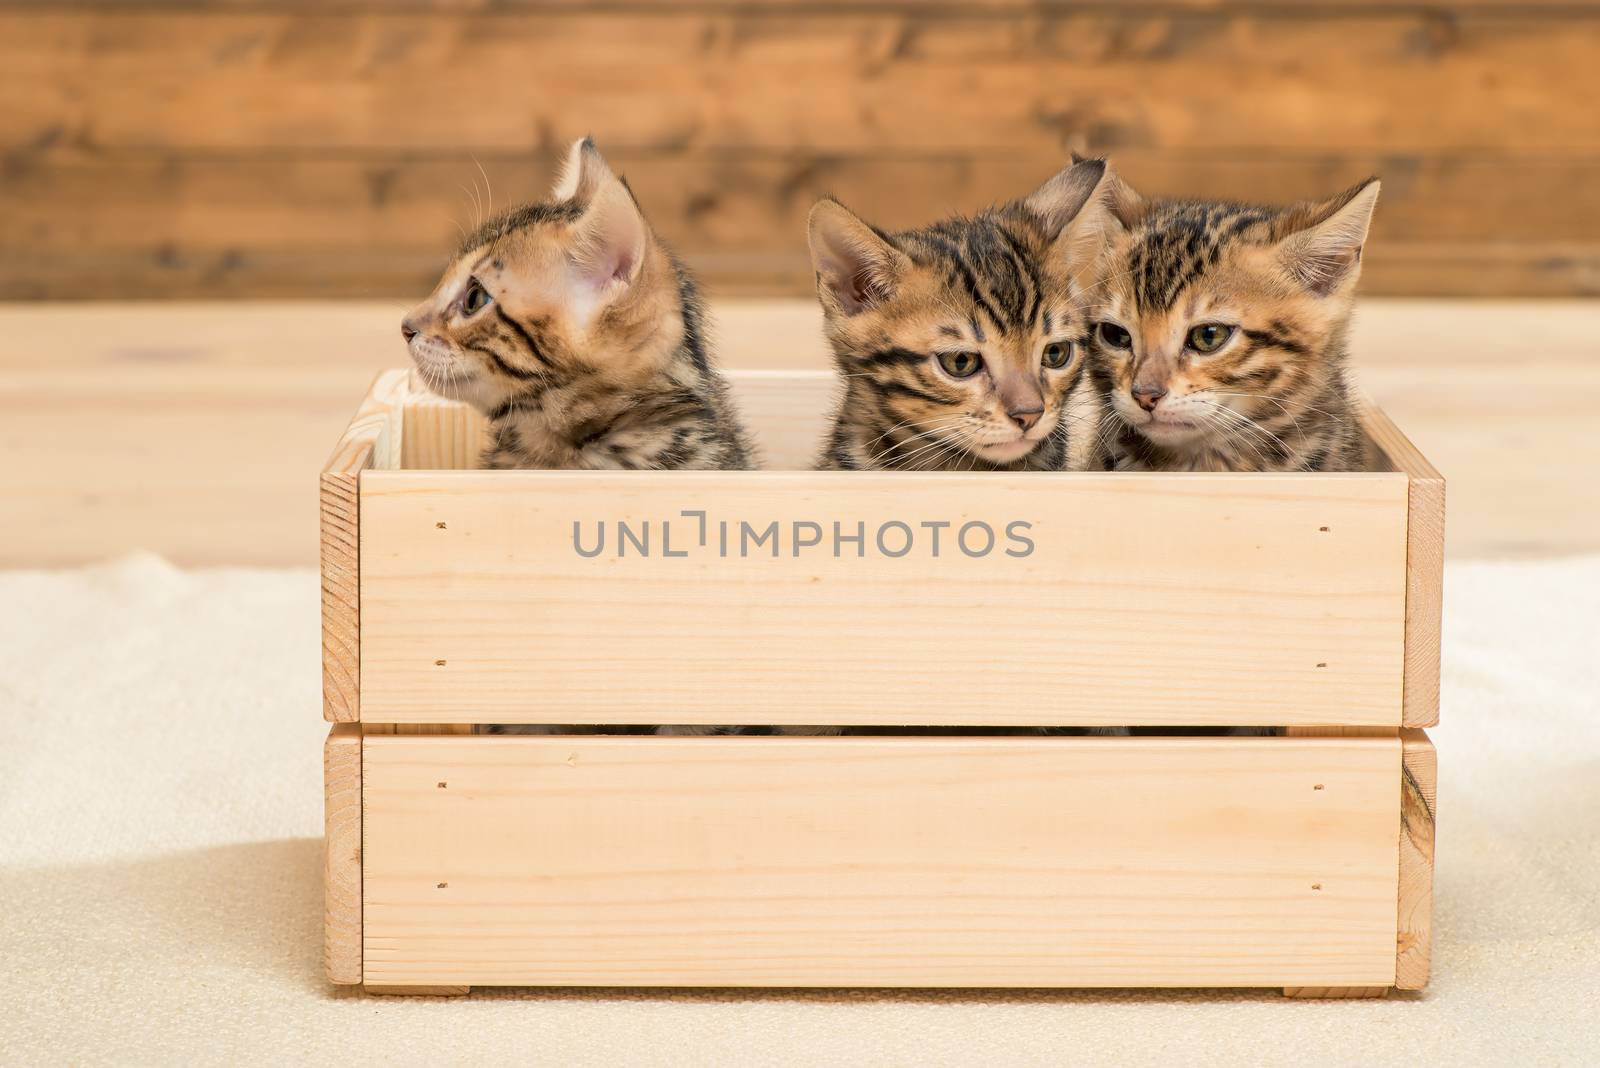 three kittens in a wooden box, closeup portrait of kittens by kosmsos111